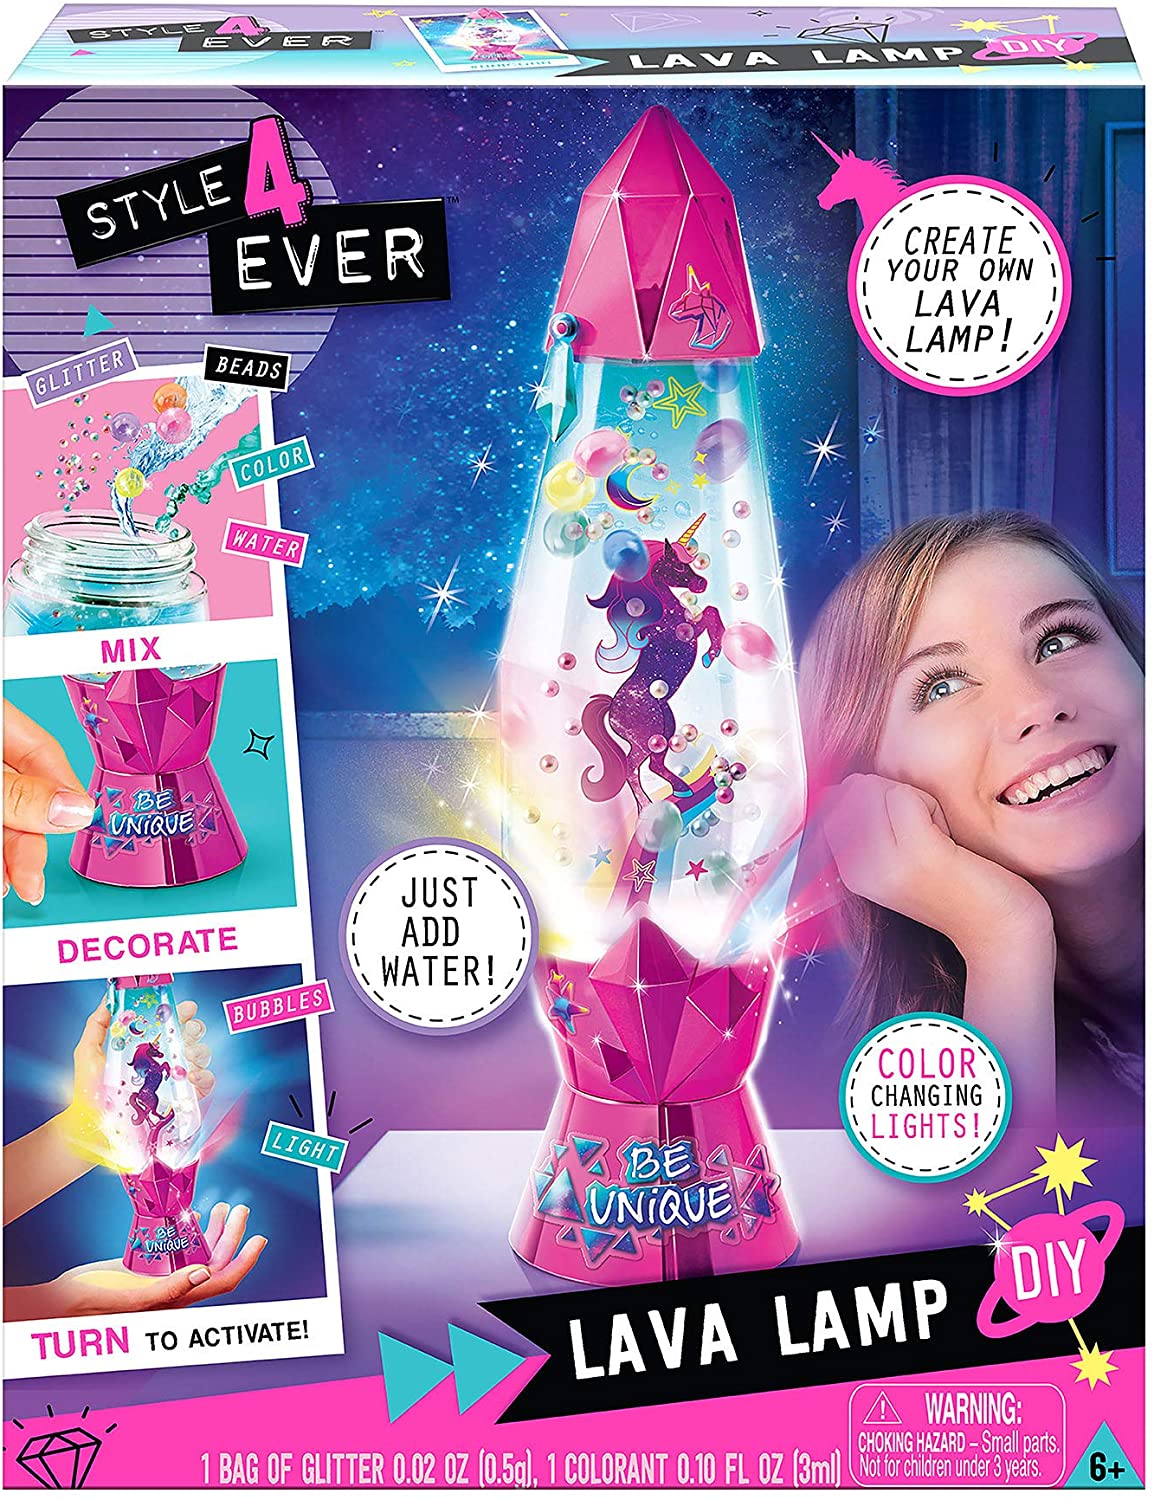 Style 4 Ever DIY Lava LAMP Kit - Create Your own Lava LAMP! Just add Water